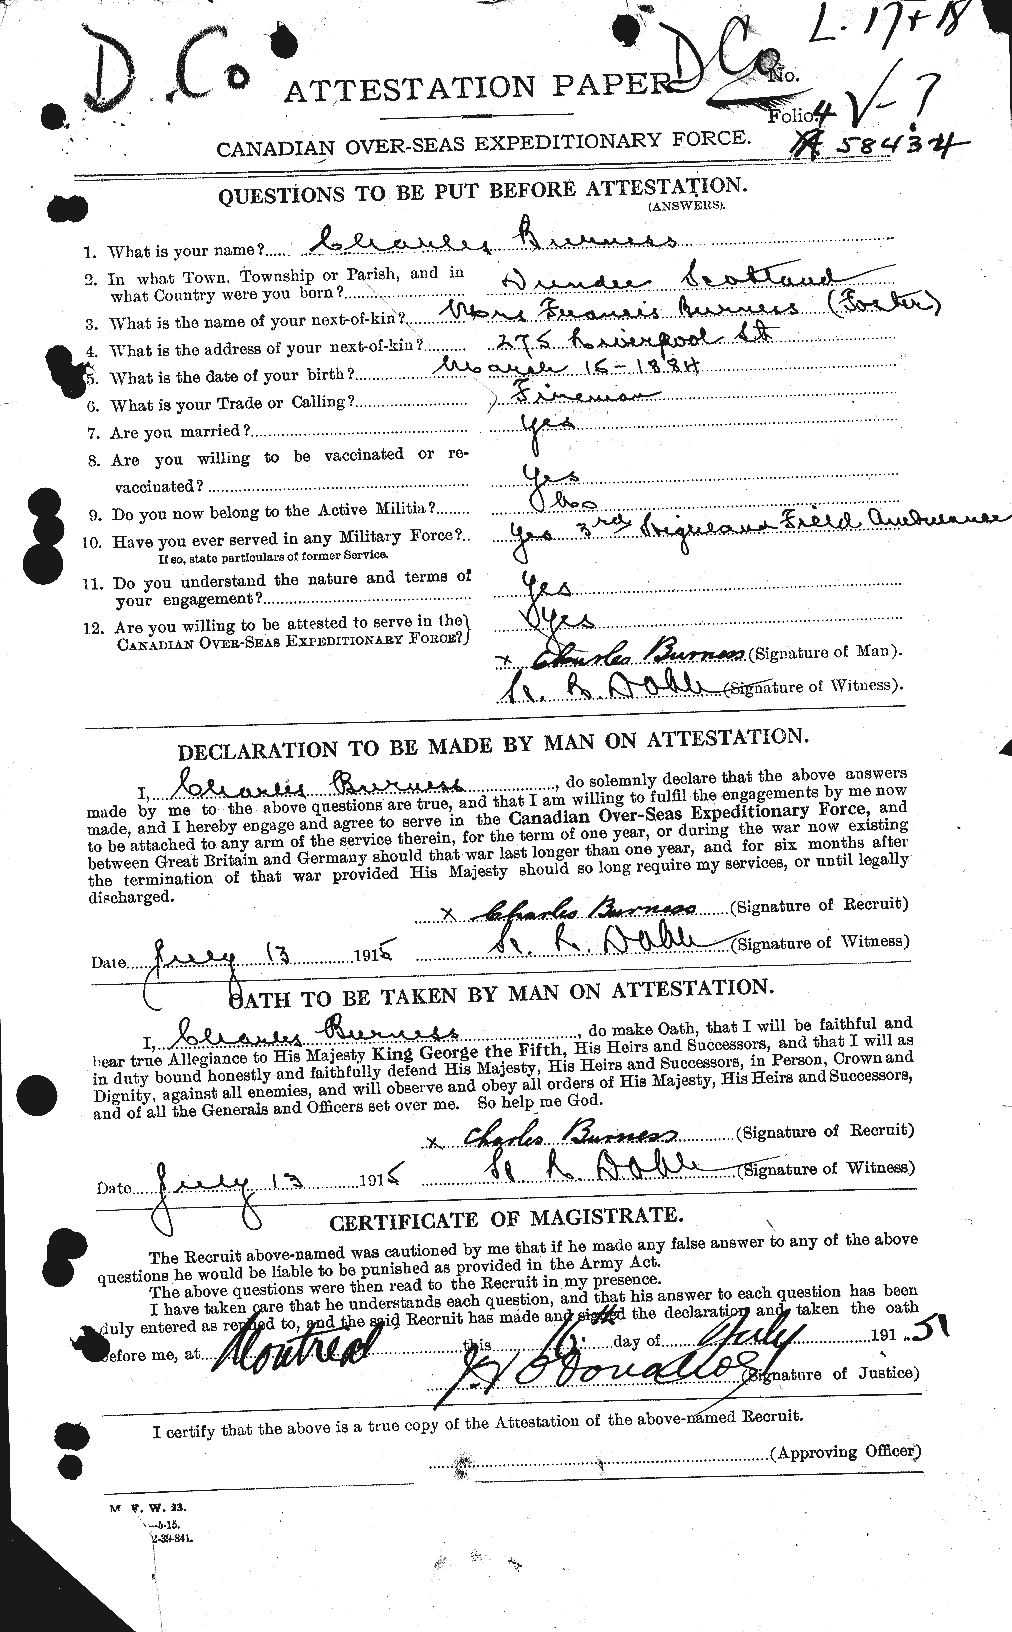 Personnel Records of the First World War - CEF 272010a